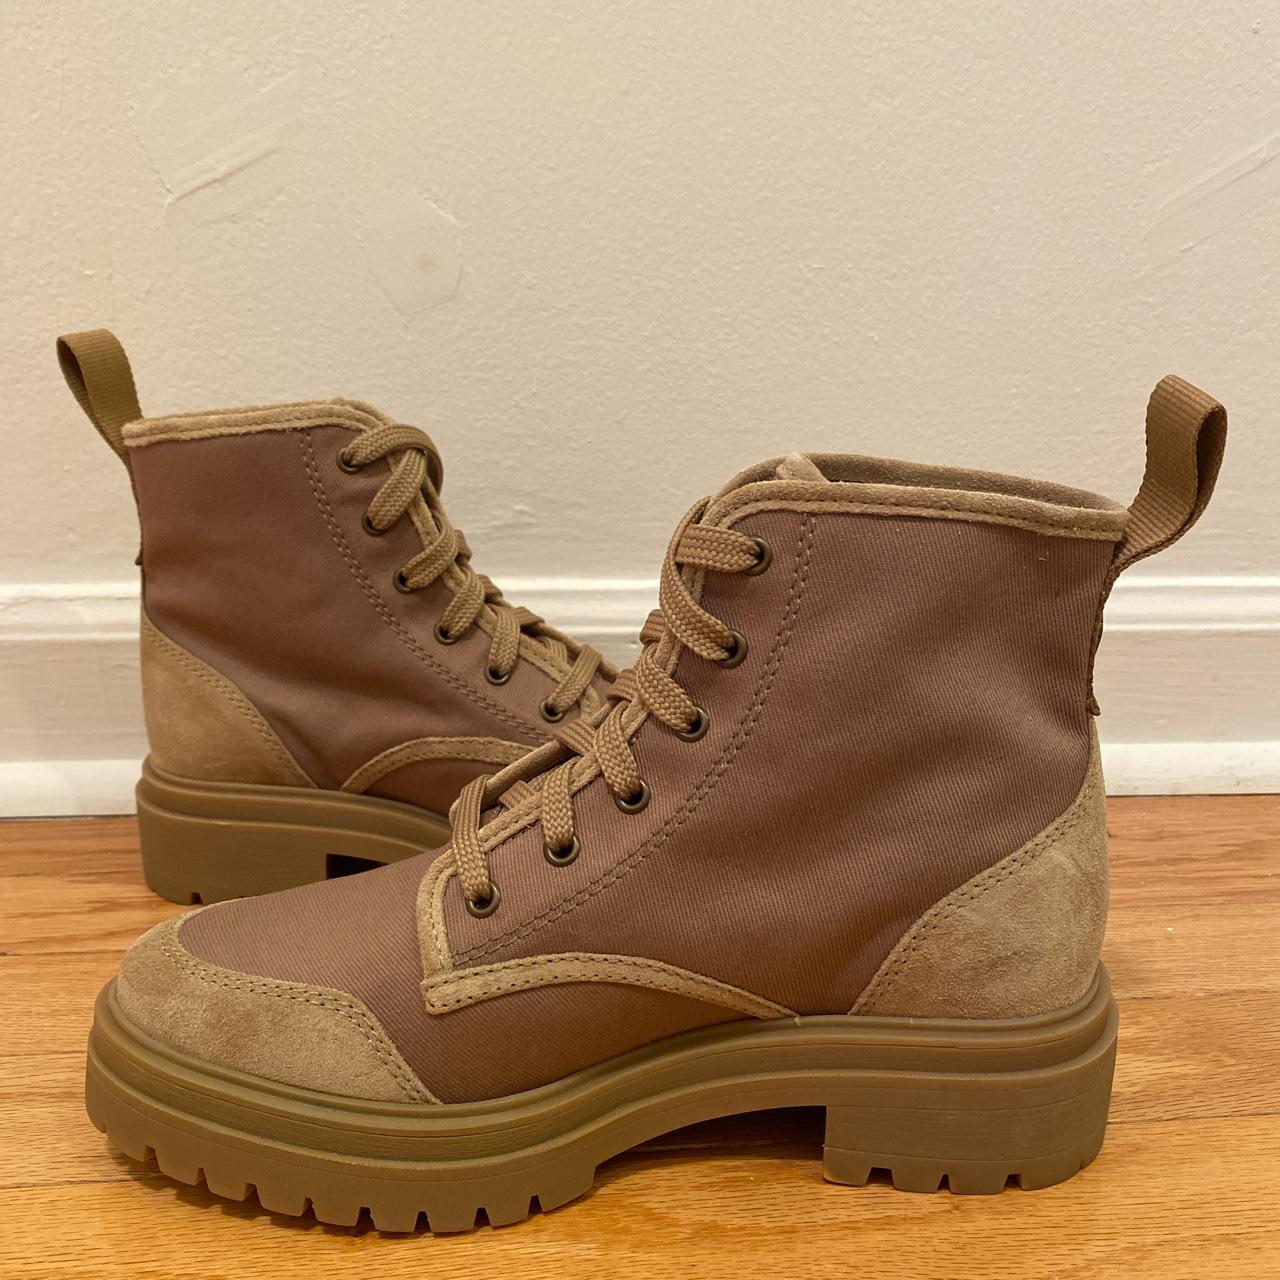 Ba&sh brand new canastra hiking boots, brown canvas - Depop